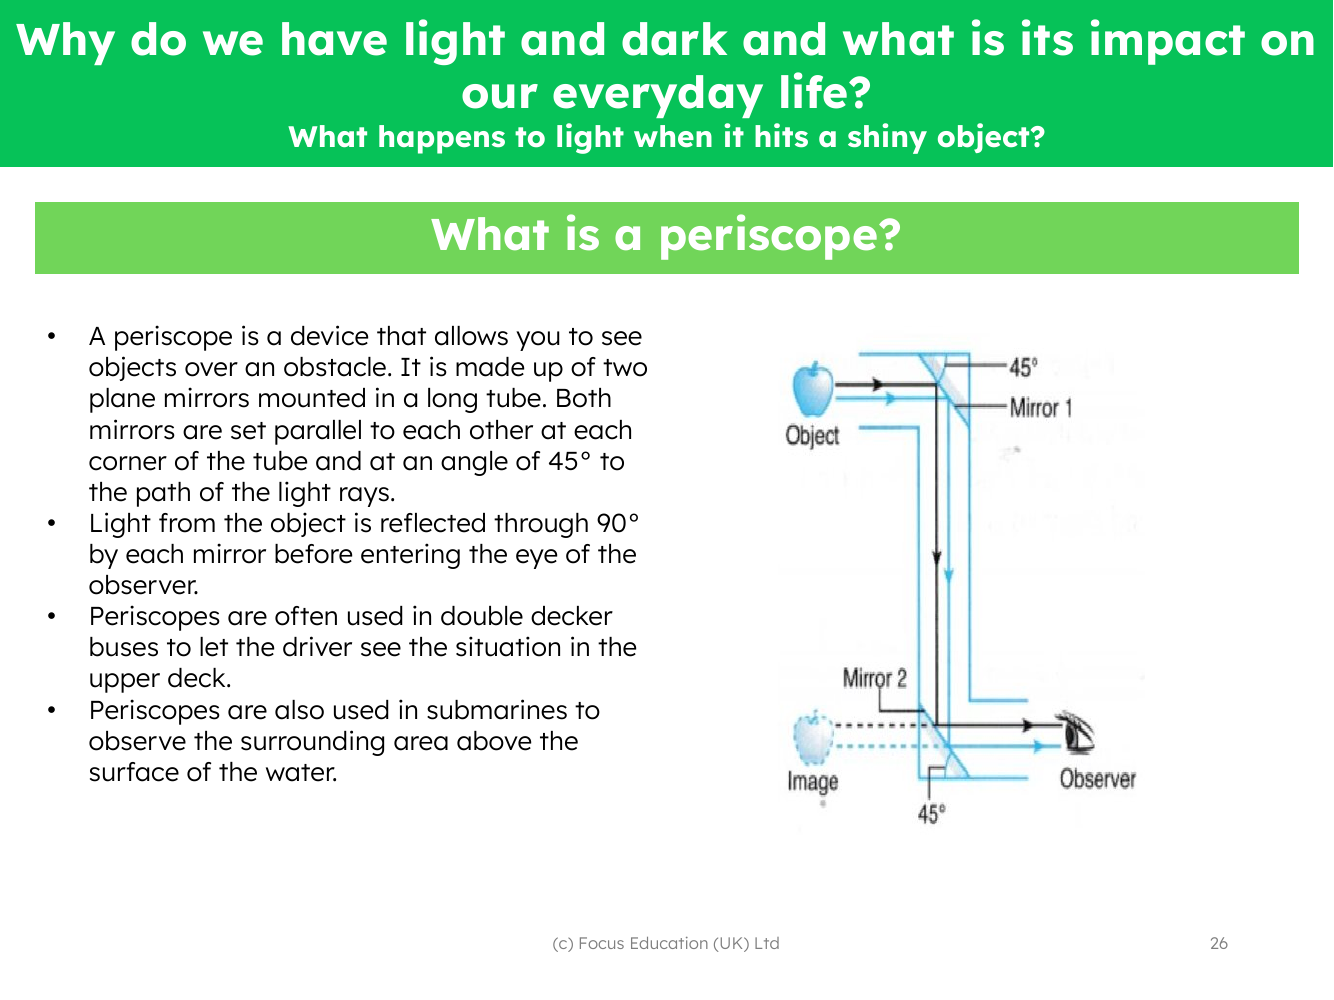 What is a periscope - Info sheet